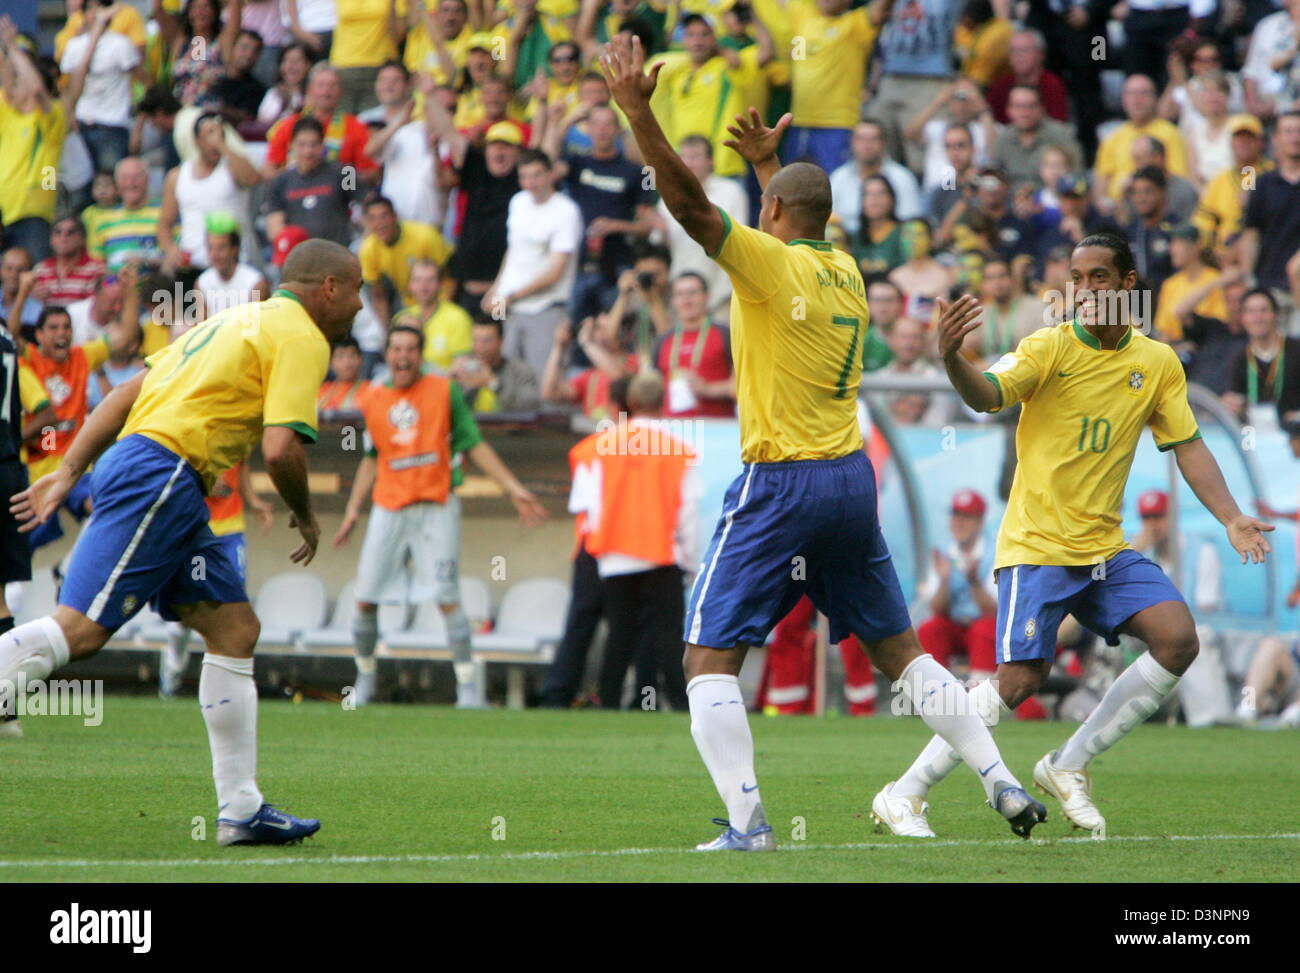 (L-R) Ronaldo, goalscorer Adriano and Ronaldinho celebrate the 1:0 score during the group F match of the 2006 FIFA World Cup between Brazil and Australia in Munich, Germany, Sunday, 18 June 2006. DPA/ALEXANDER RUESCHE +++ Mobile Services OUT +++ Please refer to FIFA's terms and conditions Stock Photo